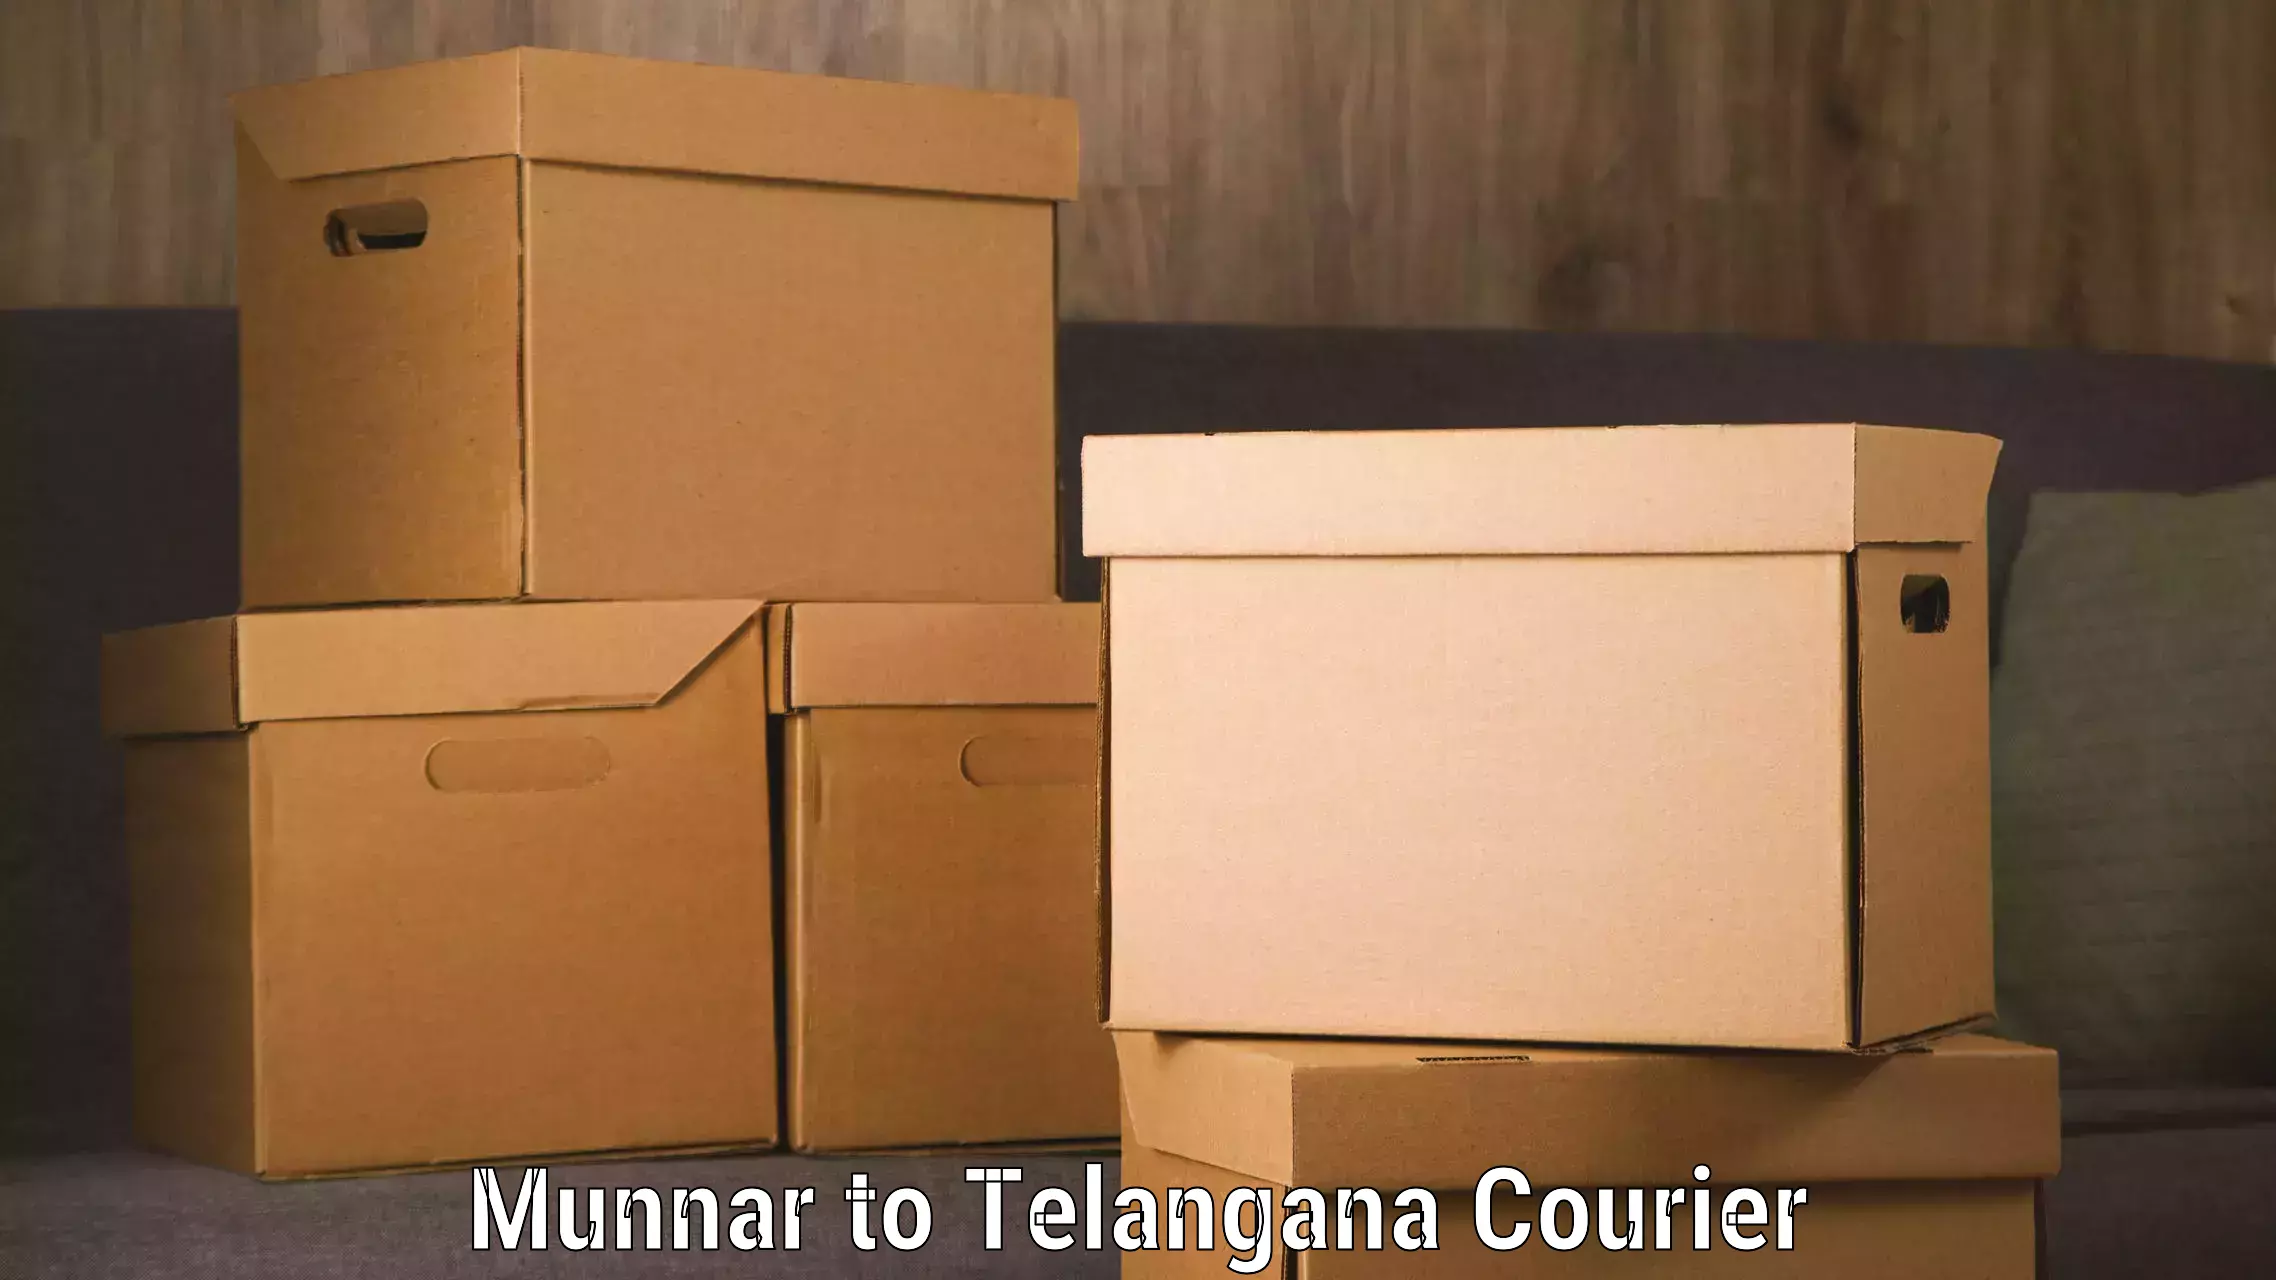 24-hour courier services in Munnar to Telangana